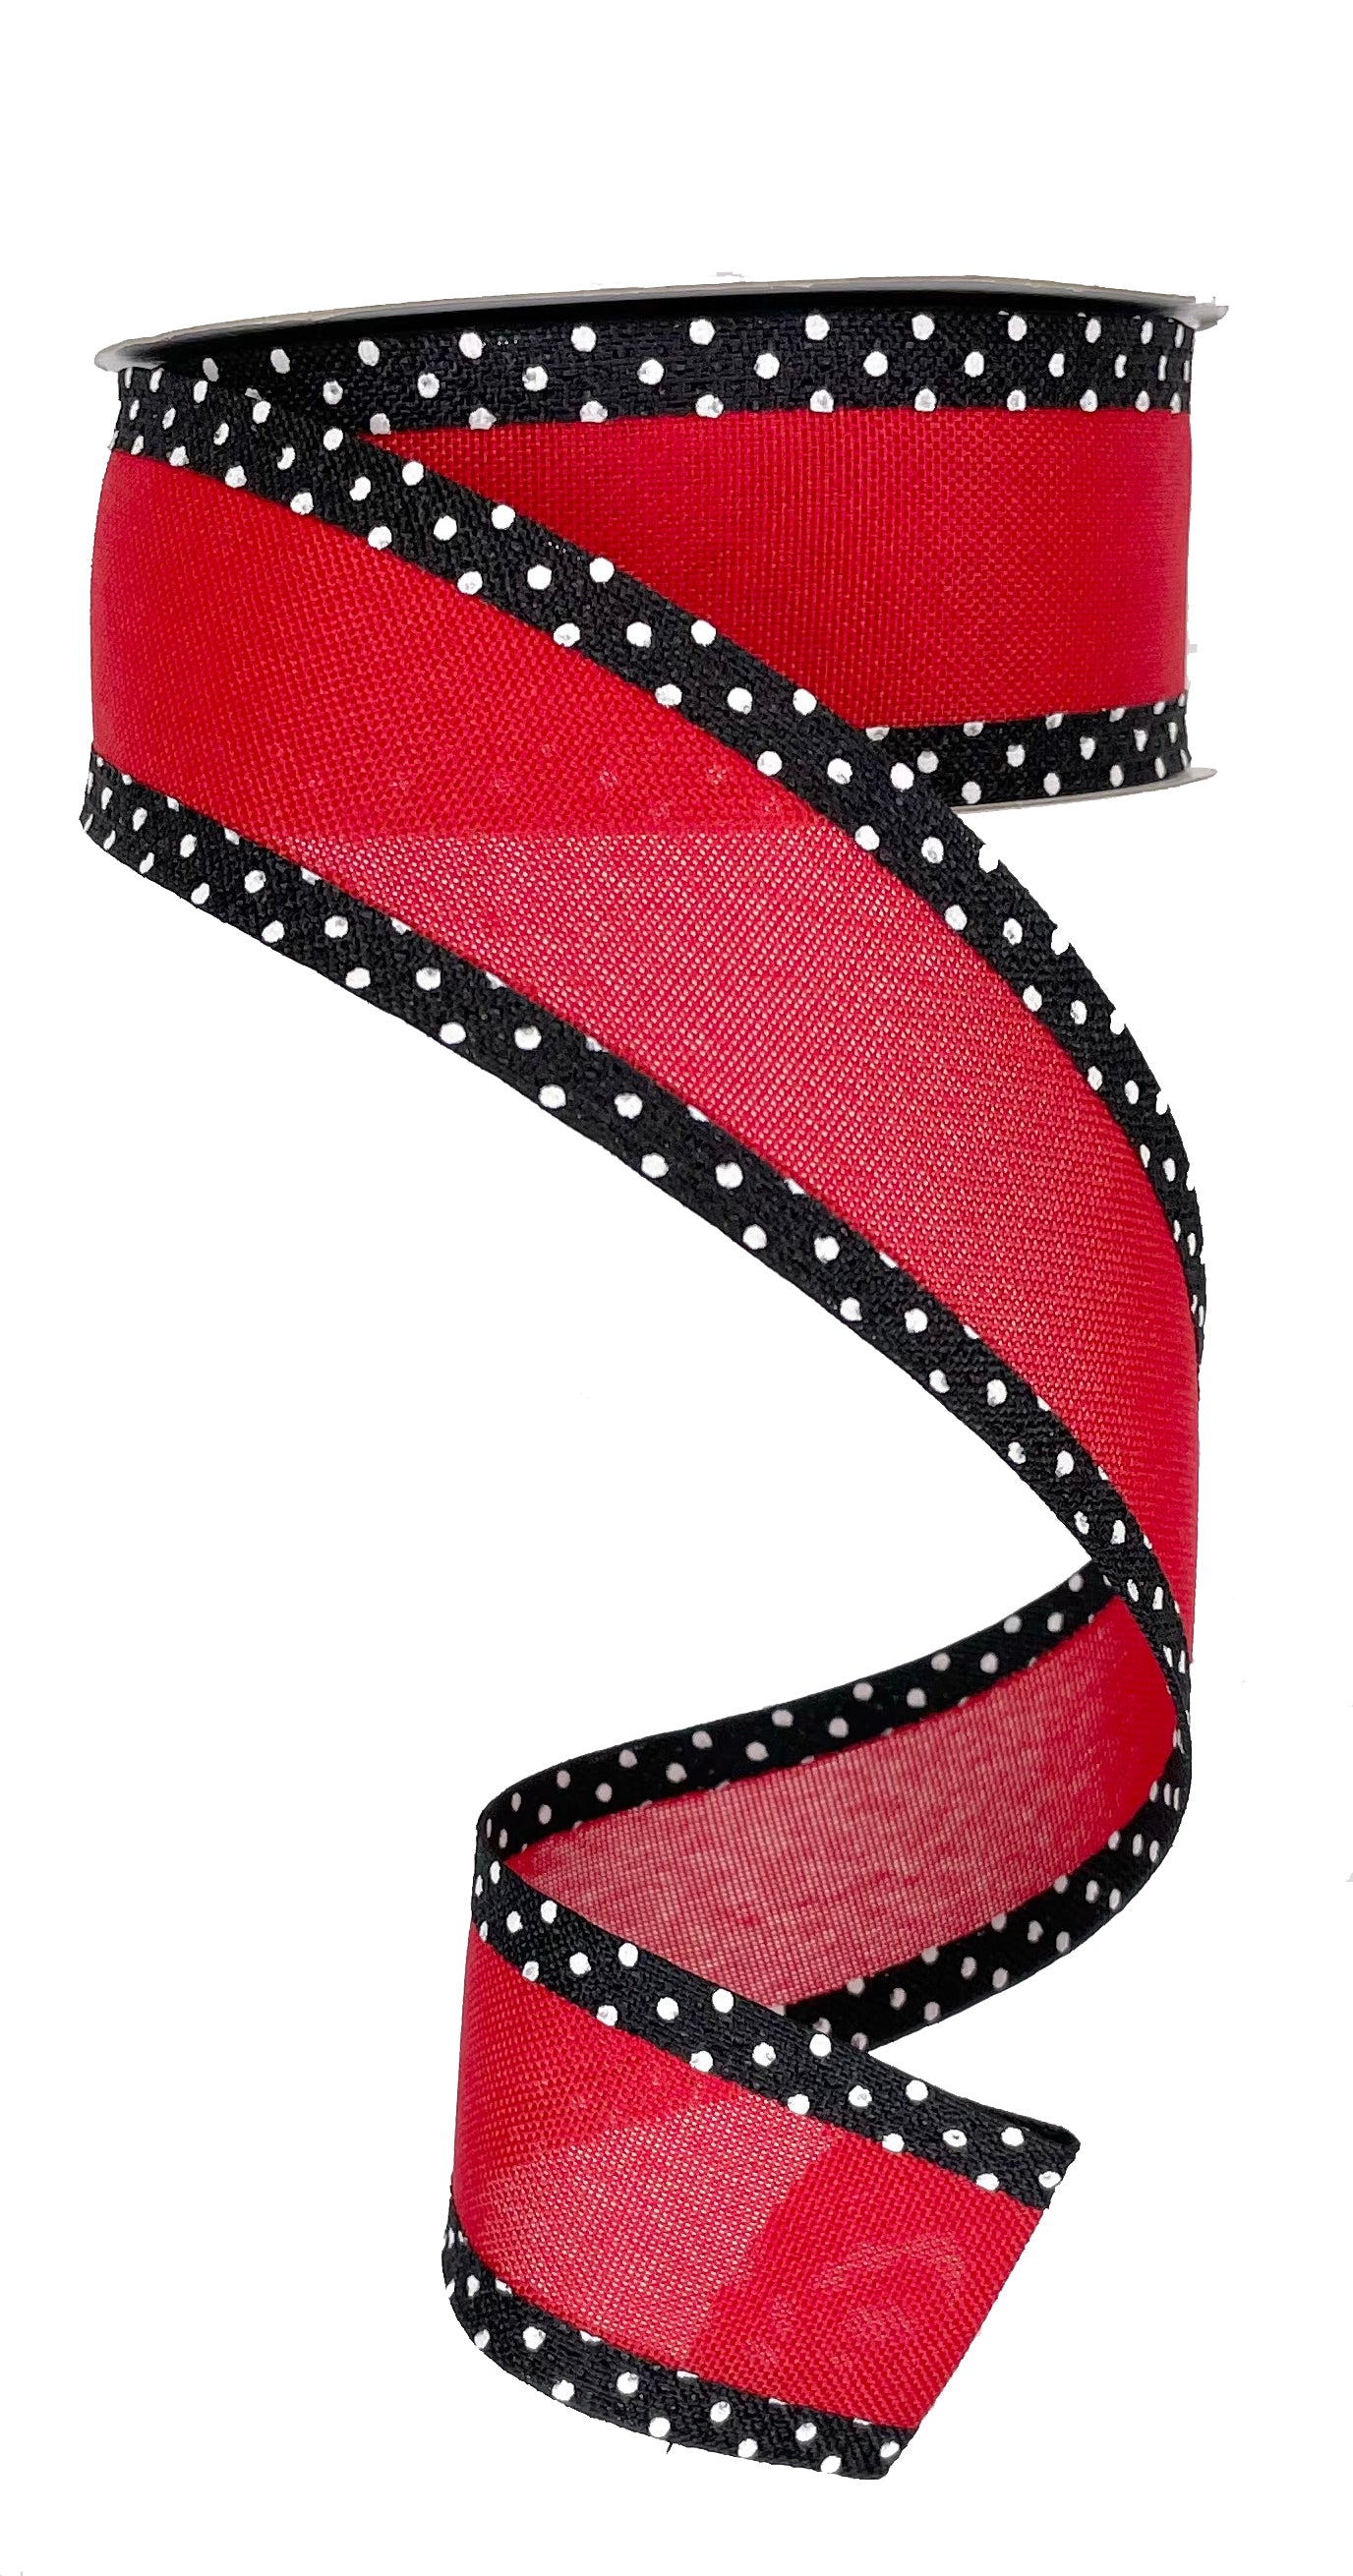 Wired Ribbon * Solid with Swiss Dot Edge * Red, White and Black Canvas * 1.5" x 10 Yards * RGC812124